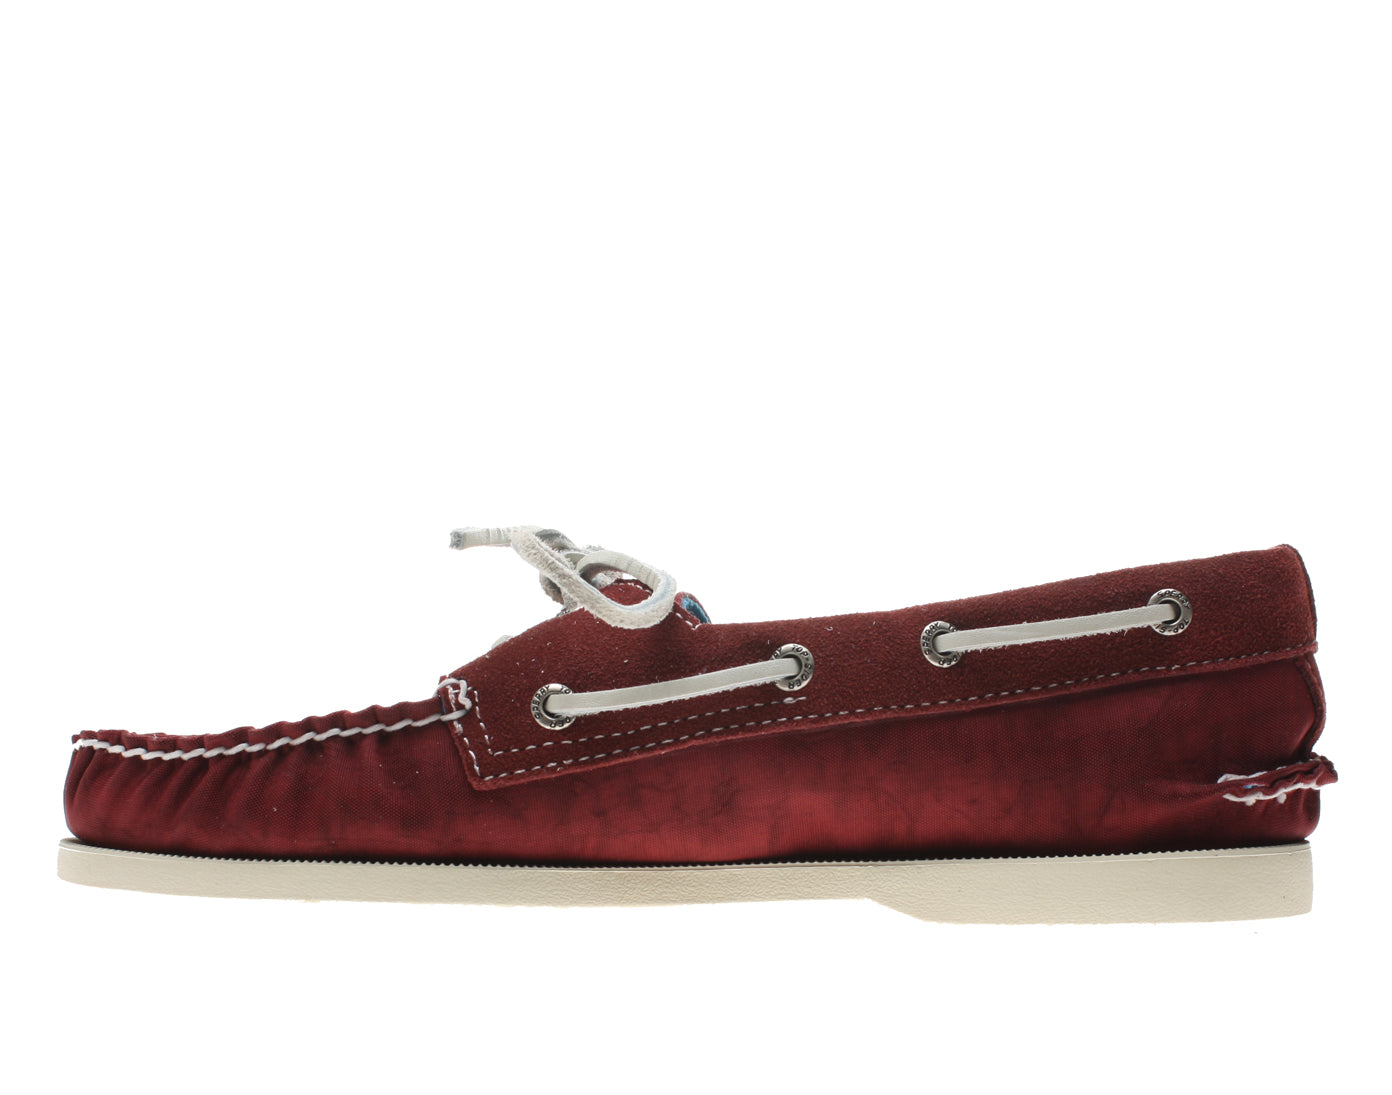 Sperry Top Sider Authentic Original Red Nylon/Suede Men's Boat Shoes 0537126